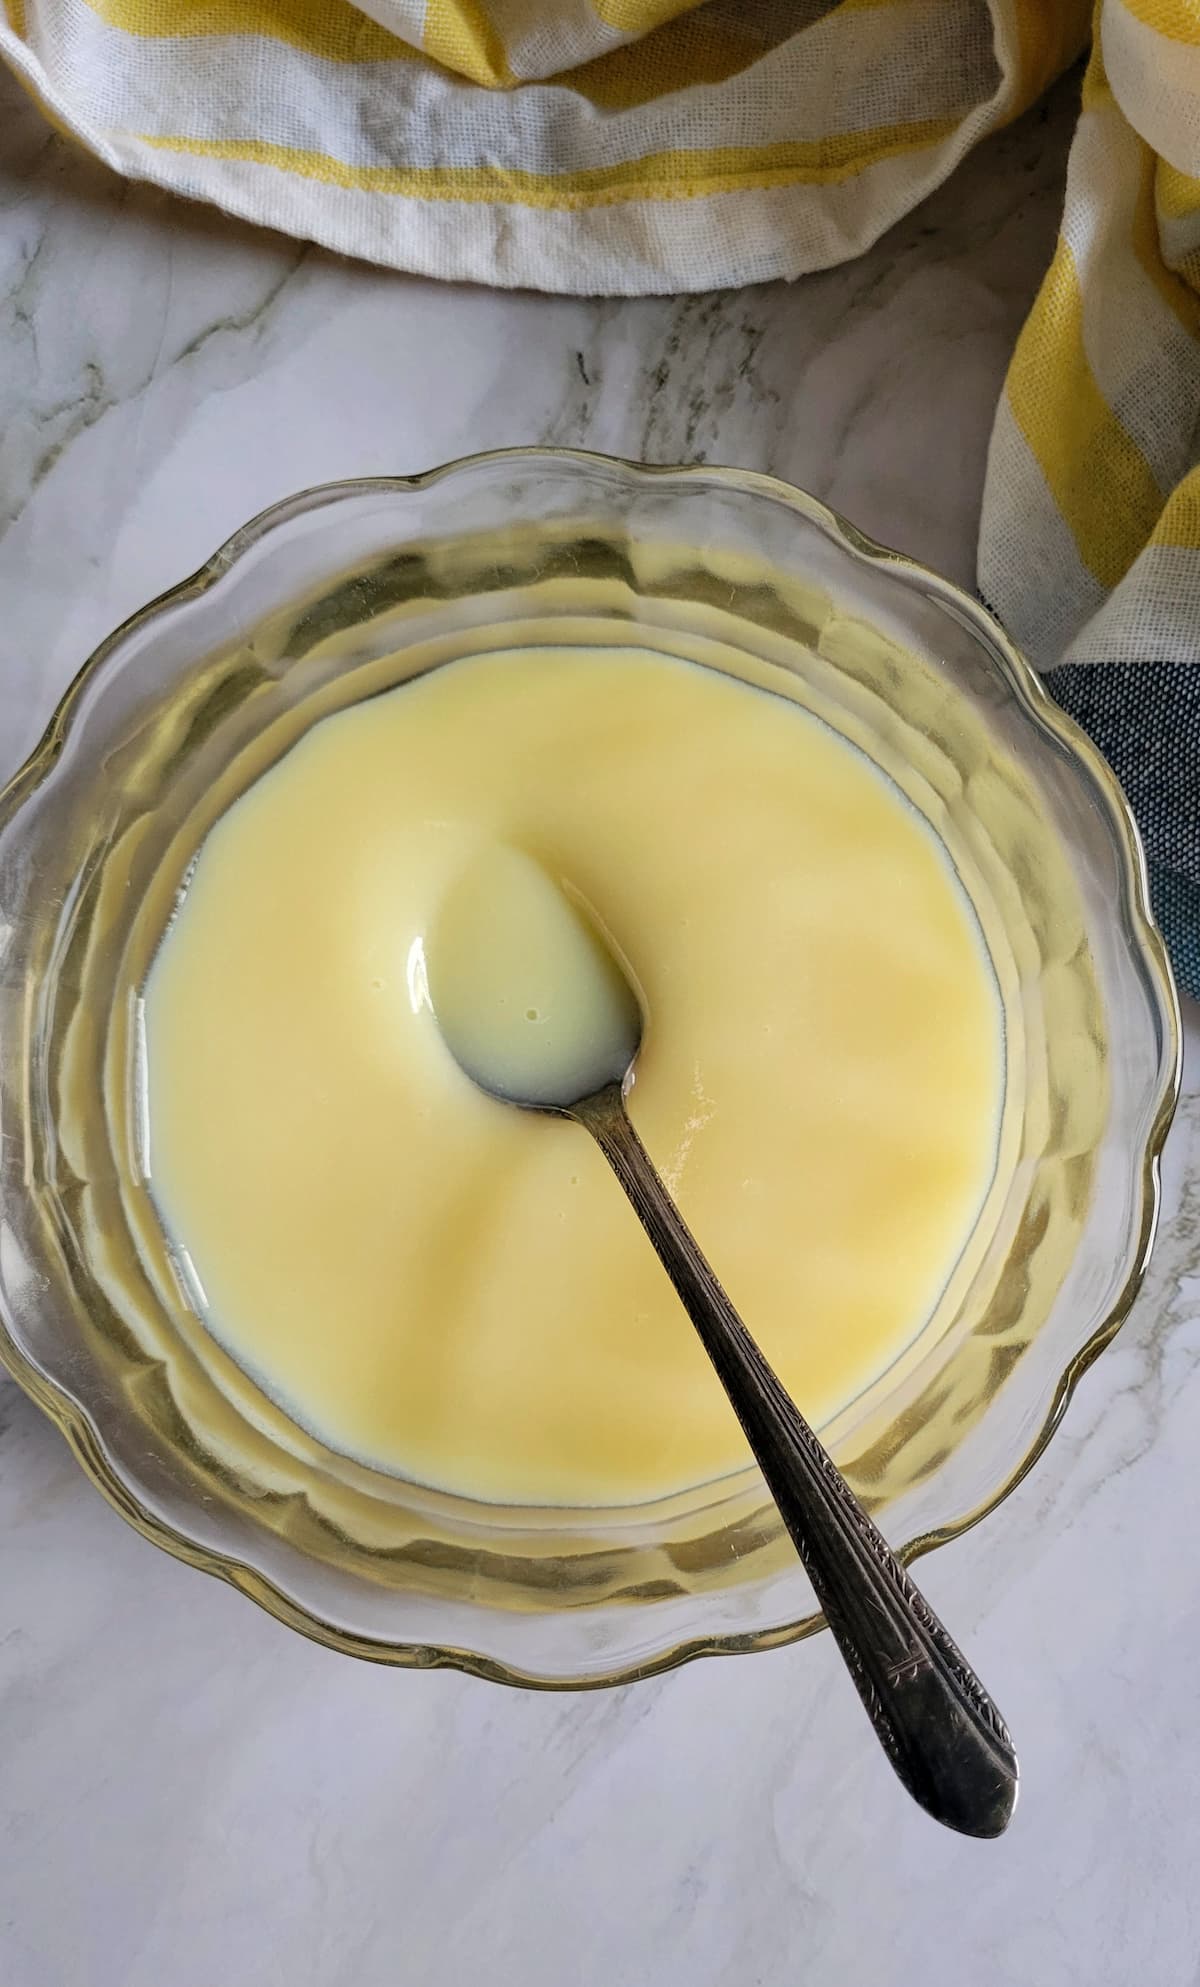 bowl of condensed milk with a spoon in it